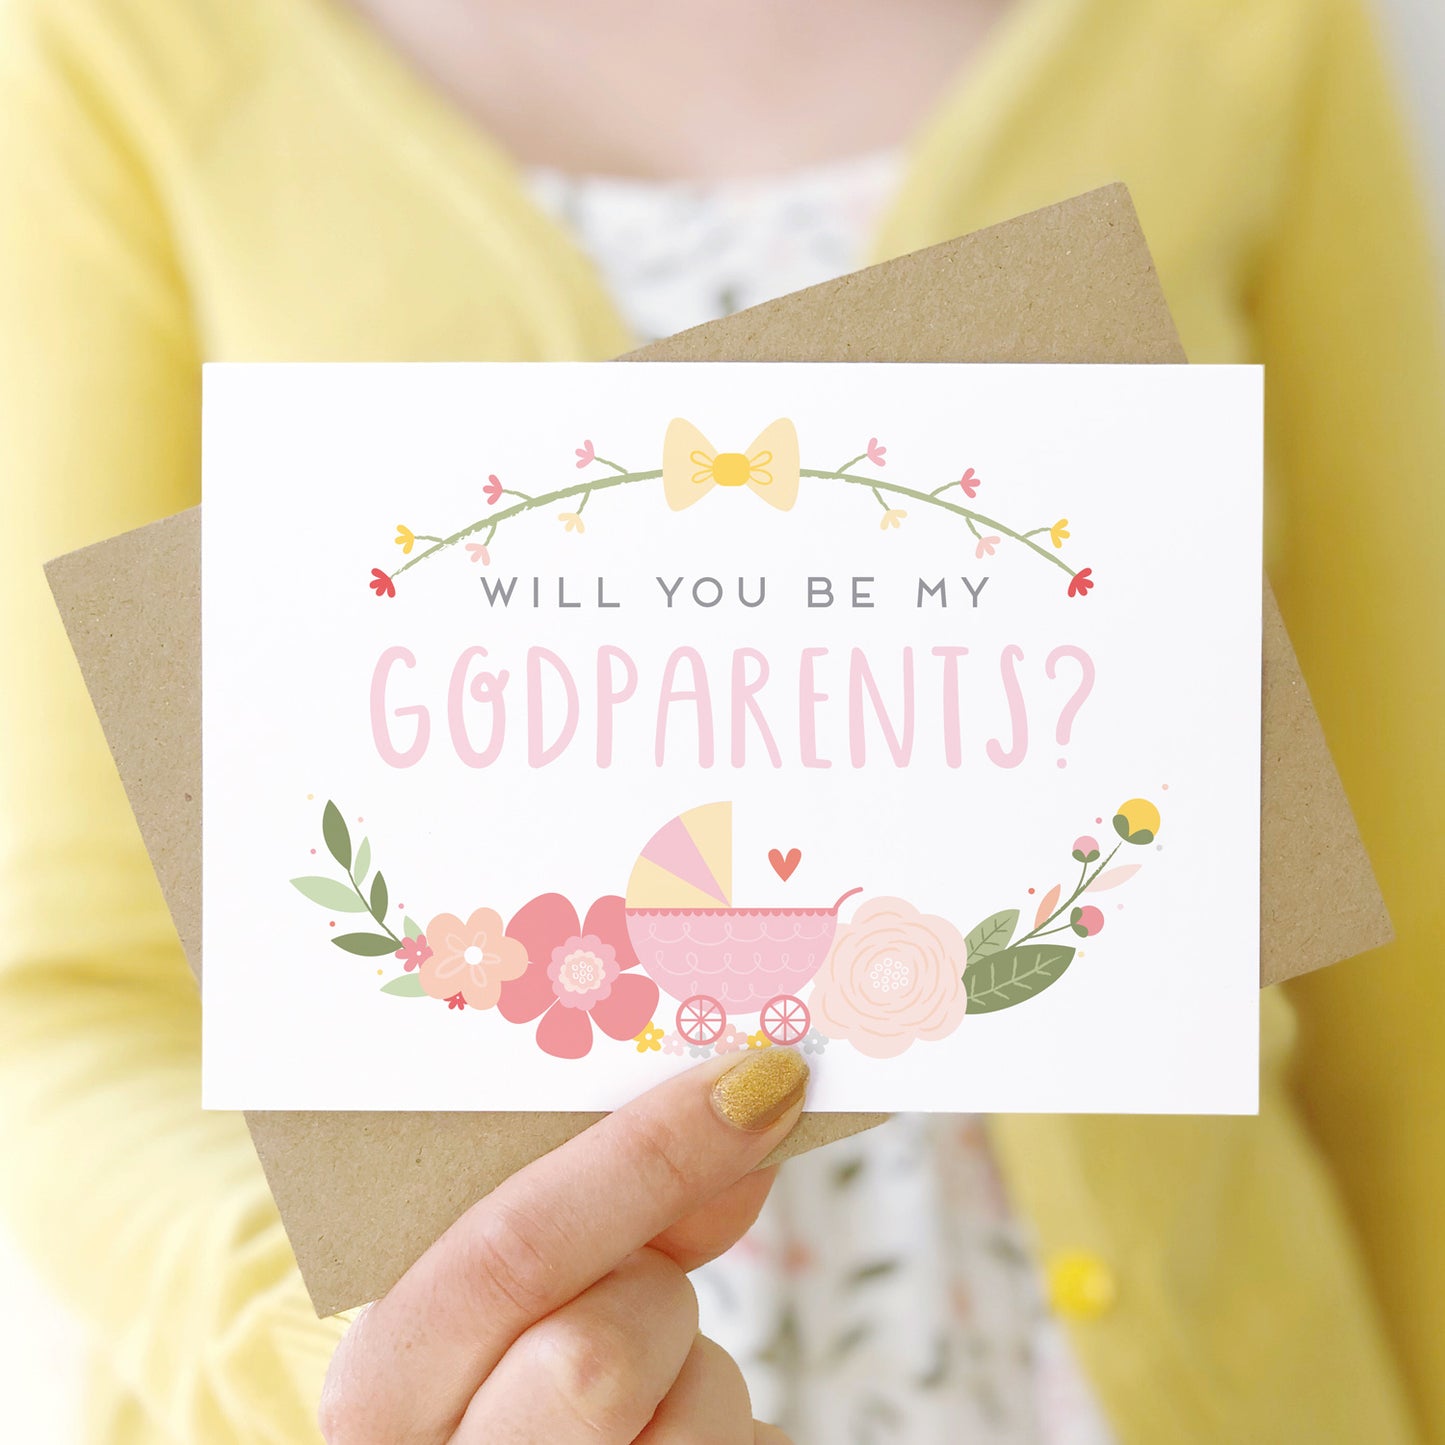 A will you be my godparents card being held in front of a white dress and yellow cardigan. The design features a pram, simple florals and the all important question. This is the pink palette.